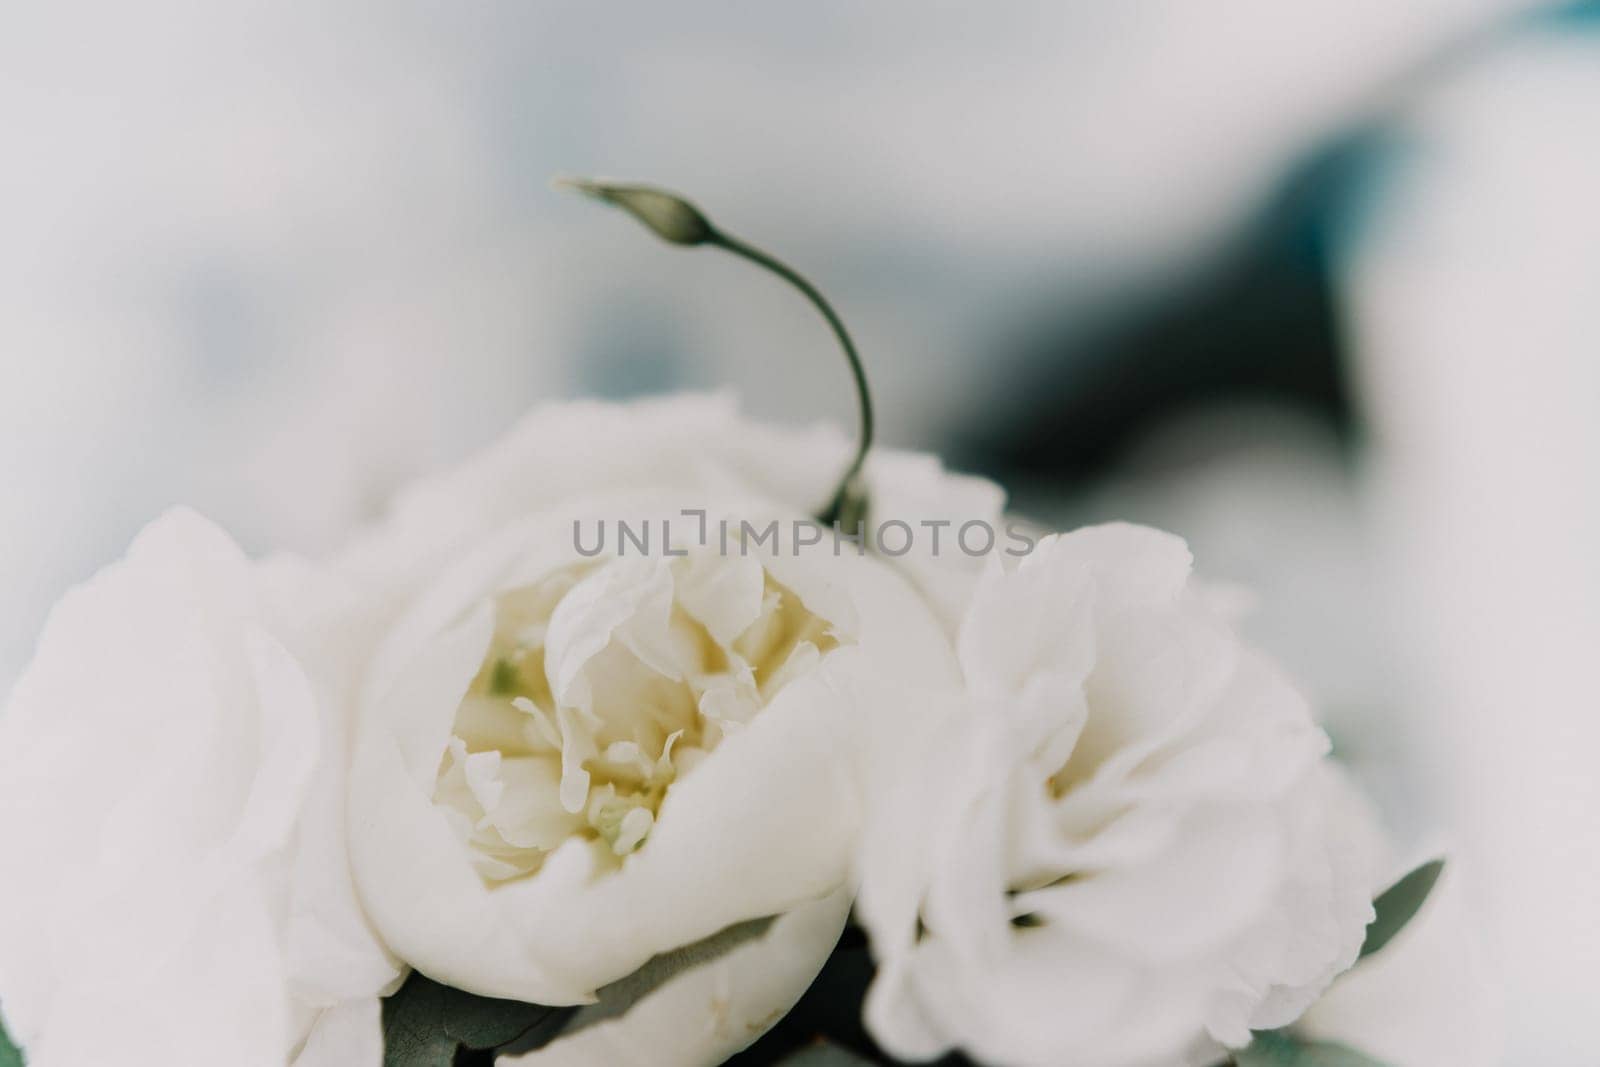 A bouquet of white flowers is sitting on a white surface. The flowers are arranged in a way that they are all facing the same direction, creating a sense of unity and harmony. by Matiunina